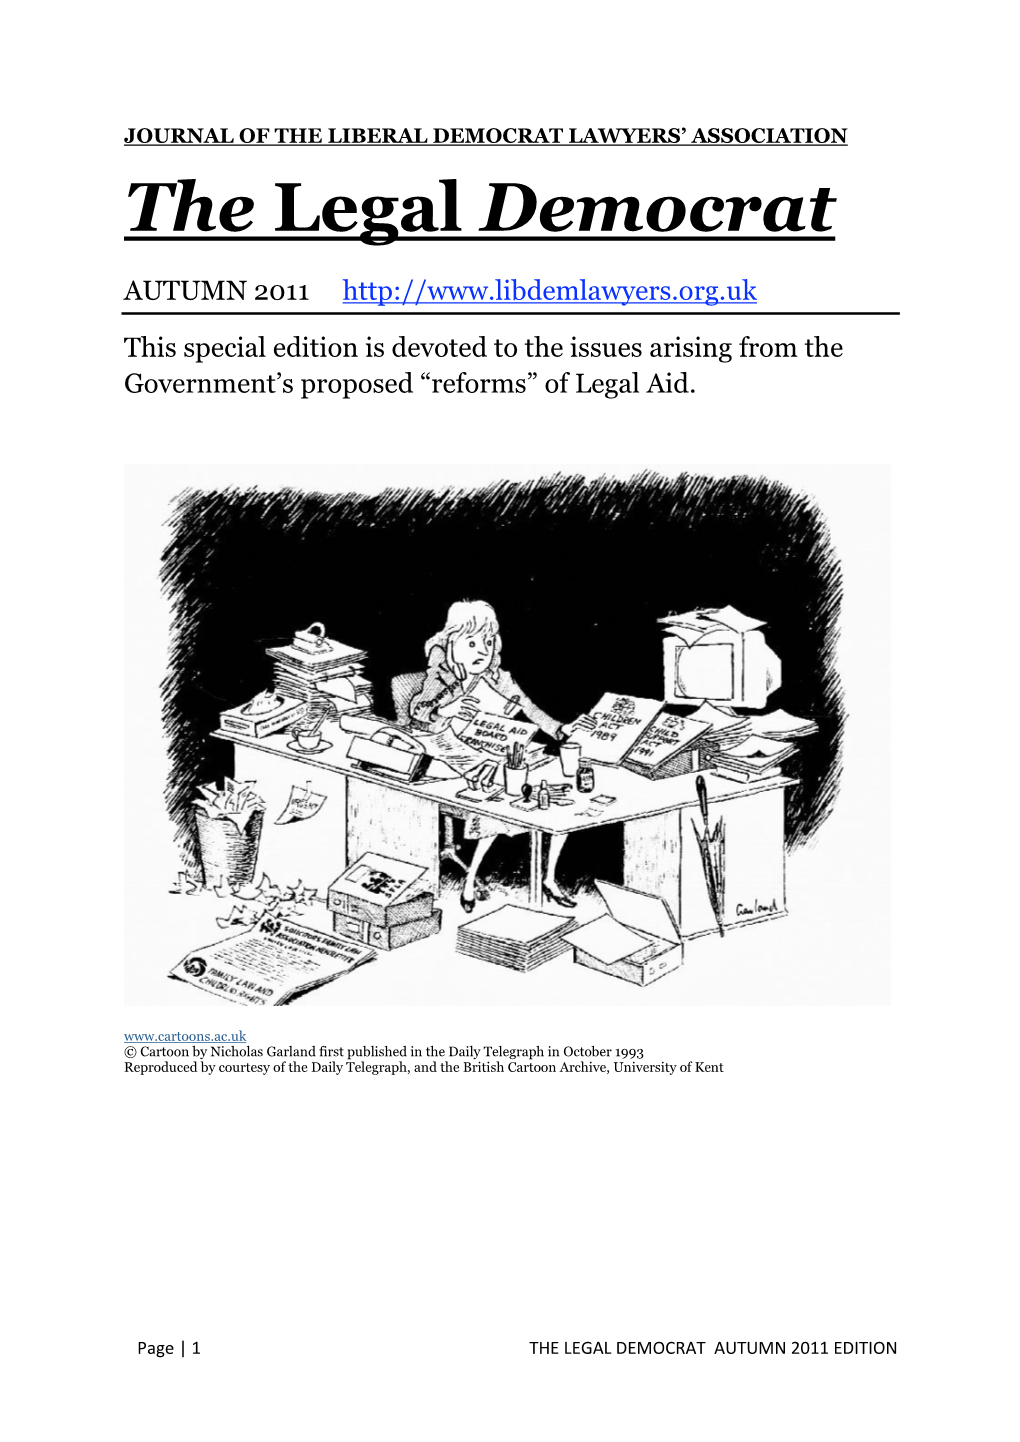 Journal of the Liberal Democrat Lawyers' Association